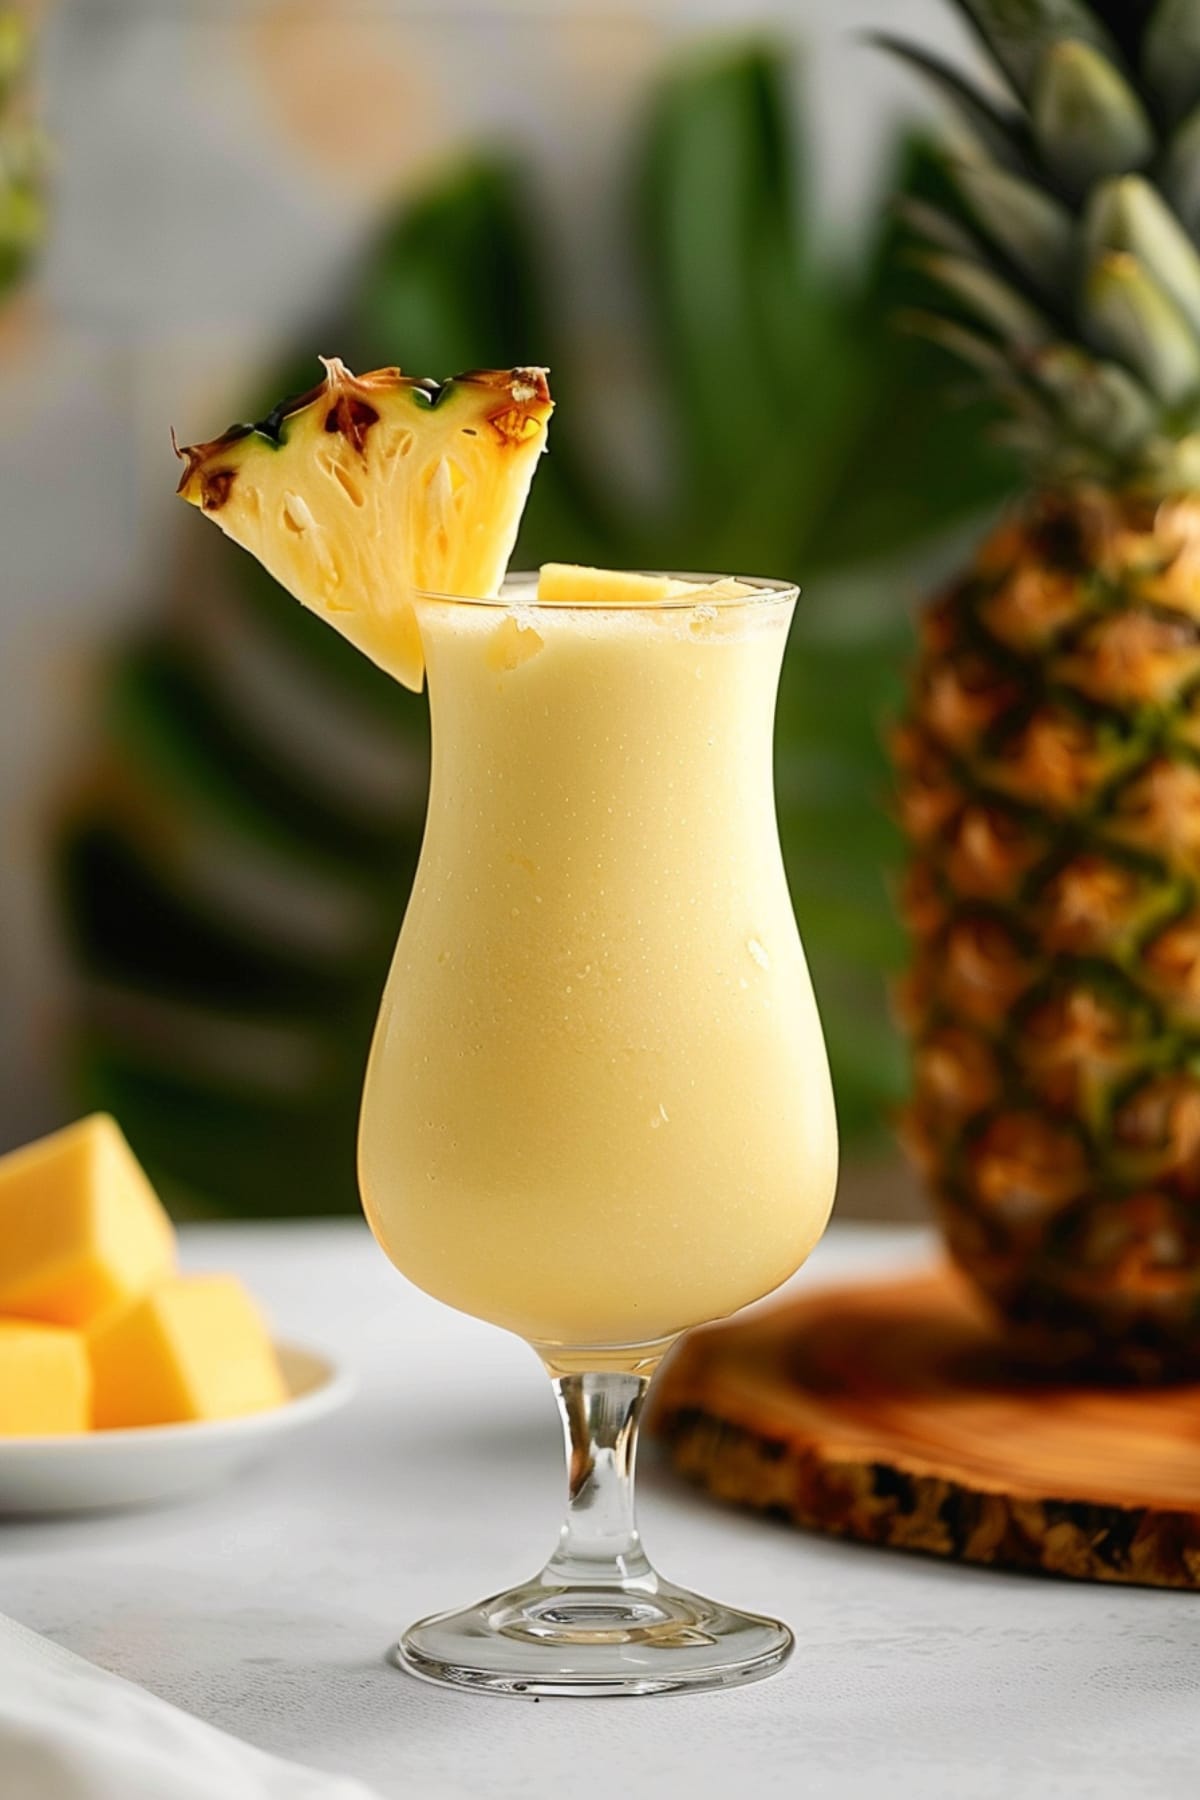 Light, creamy and refreshing homemade pina colada in a glass